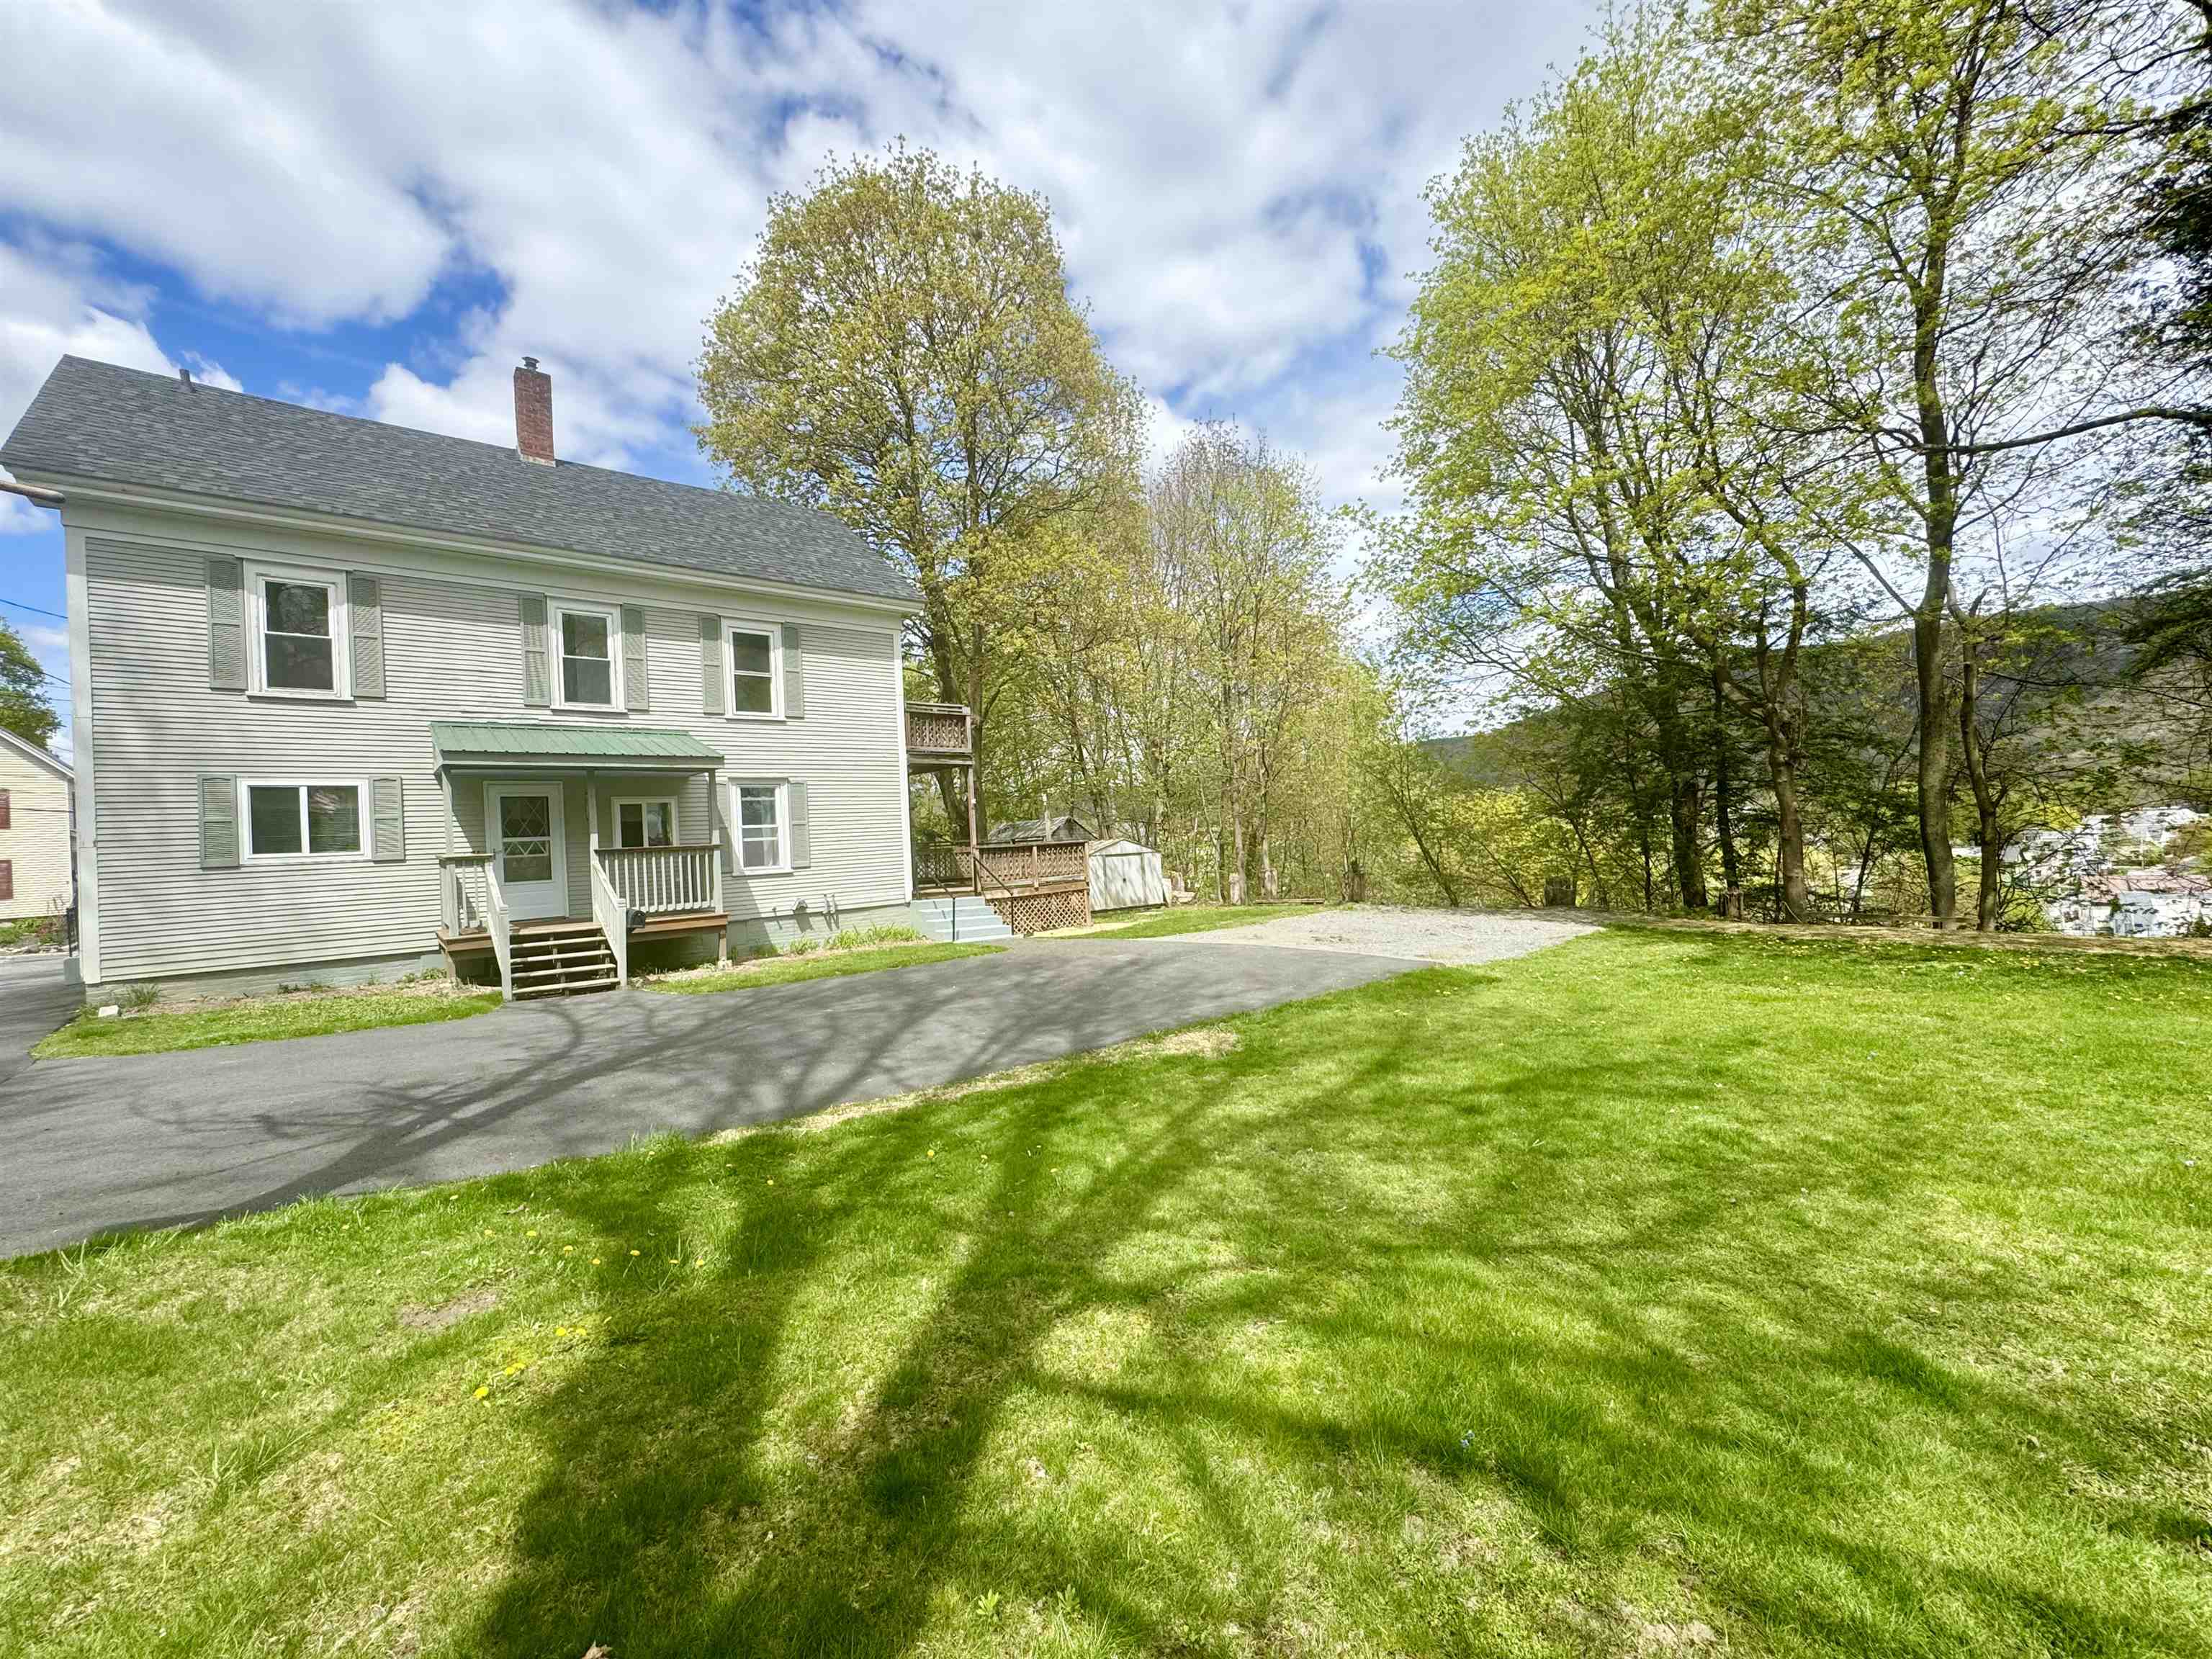 VILLAGE OF BELLOWS FALLS IN TOWN OF ROCKINGHAM VT Homes for sale